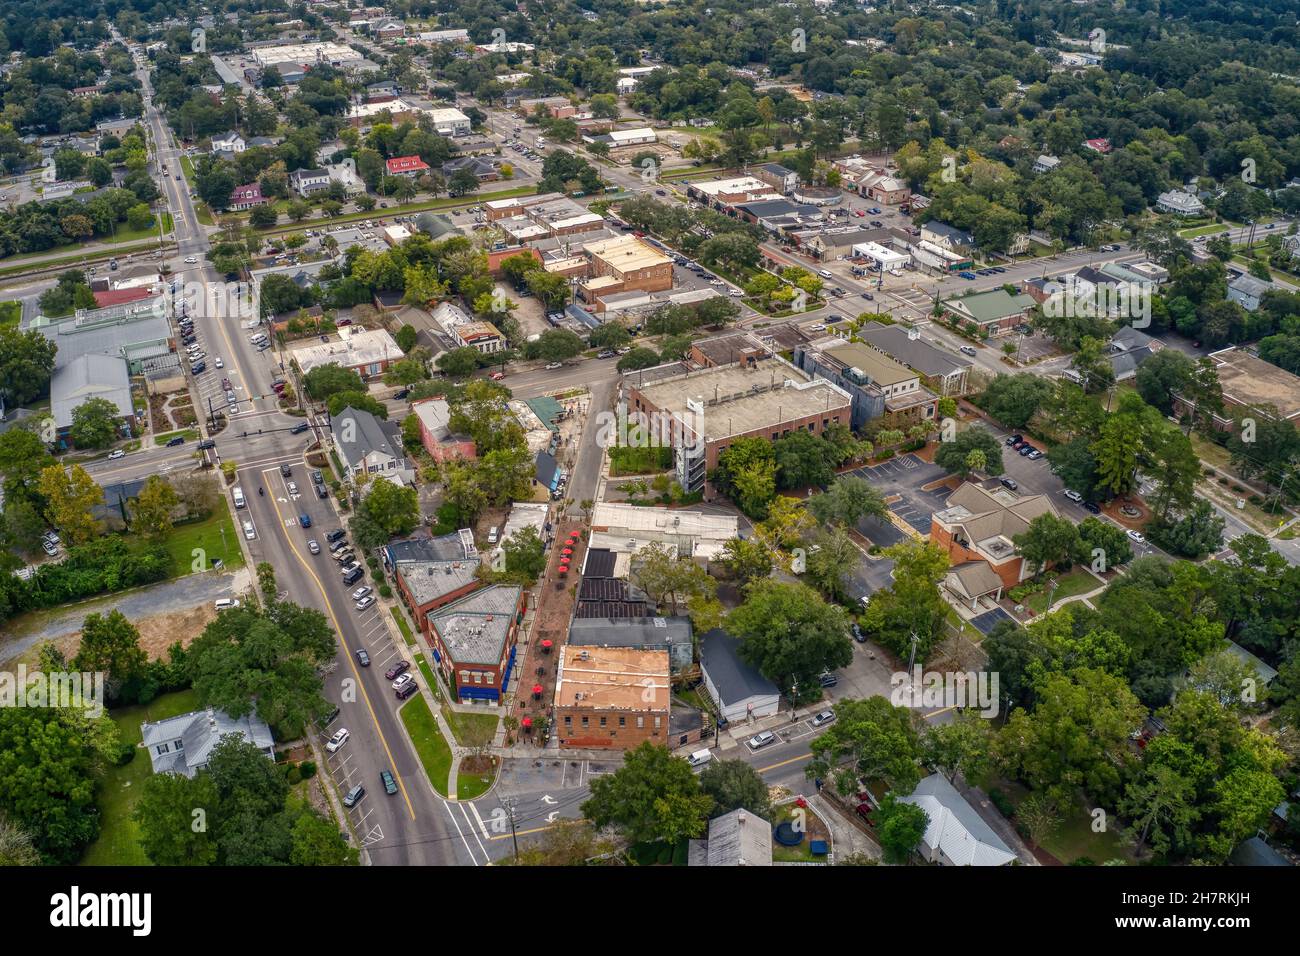 Beautiful Aerial View Of The Charleston Suburb Of Summerville South